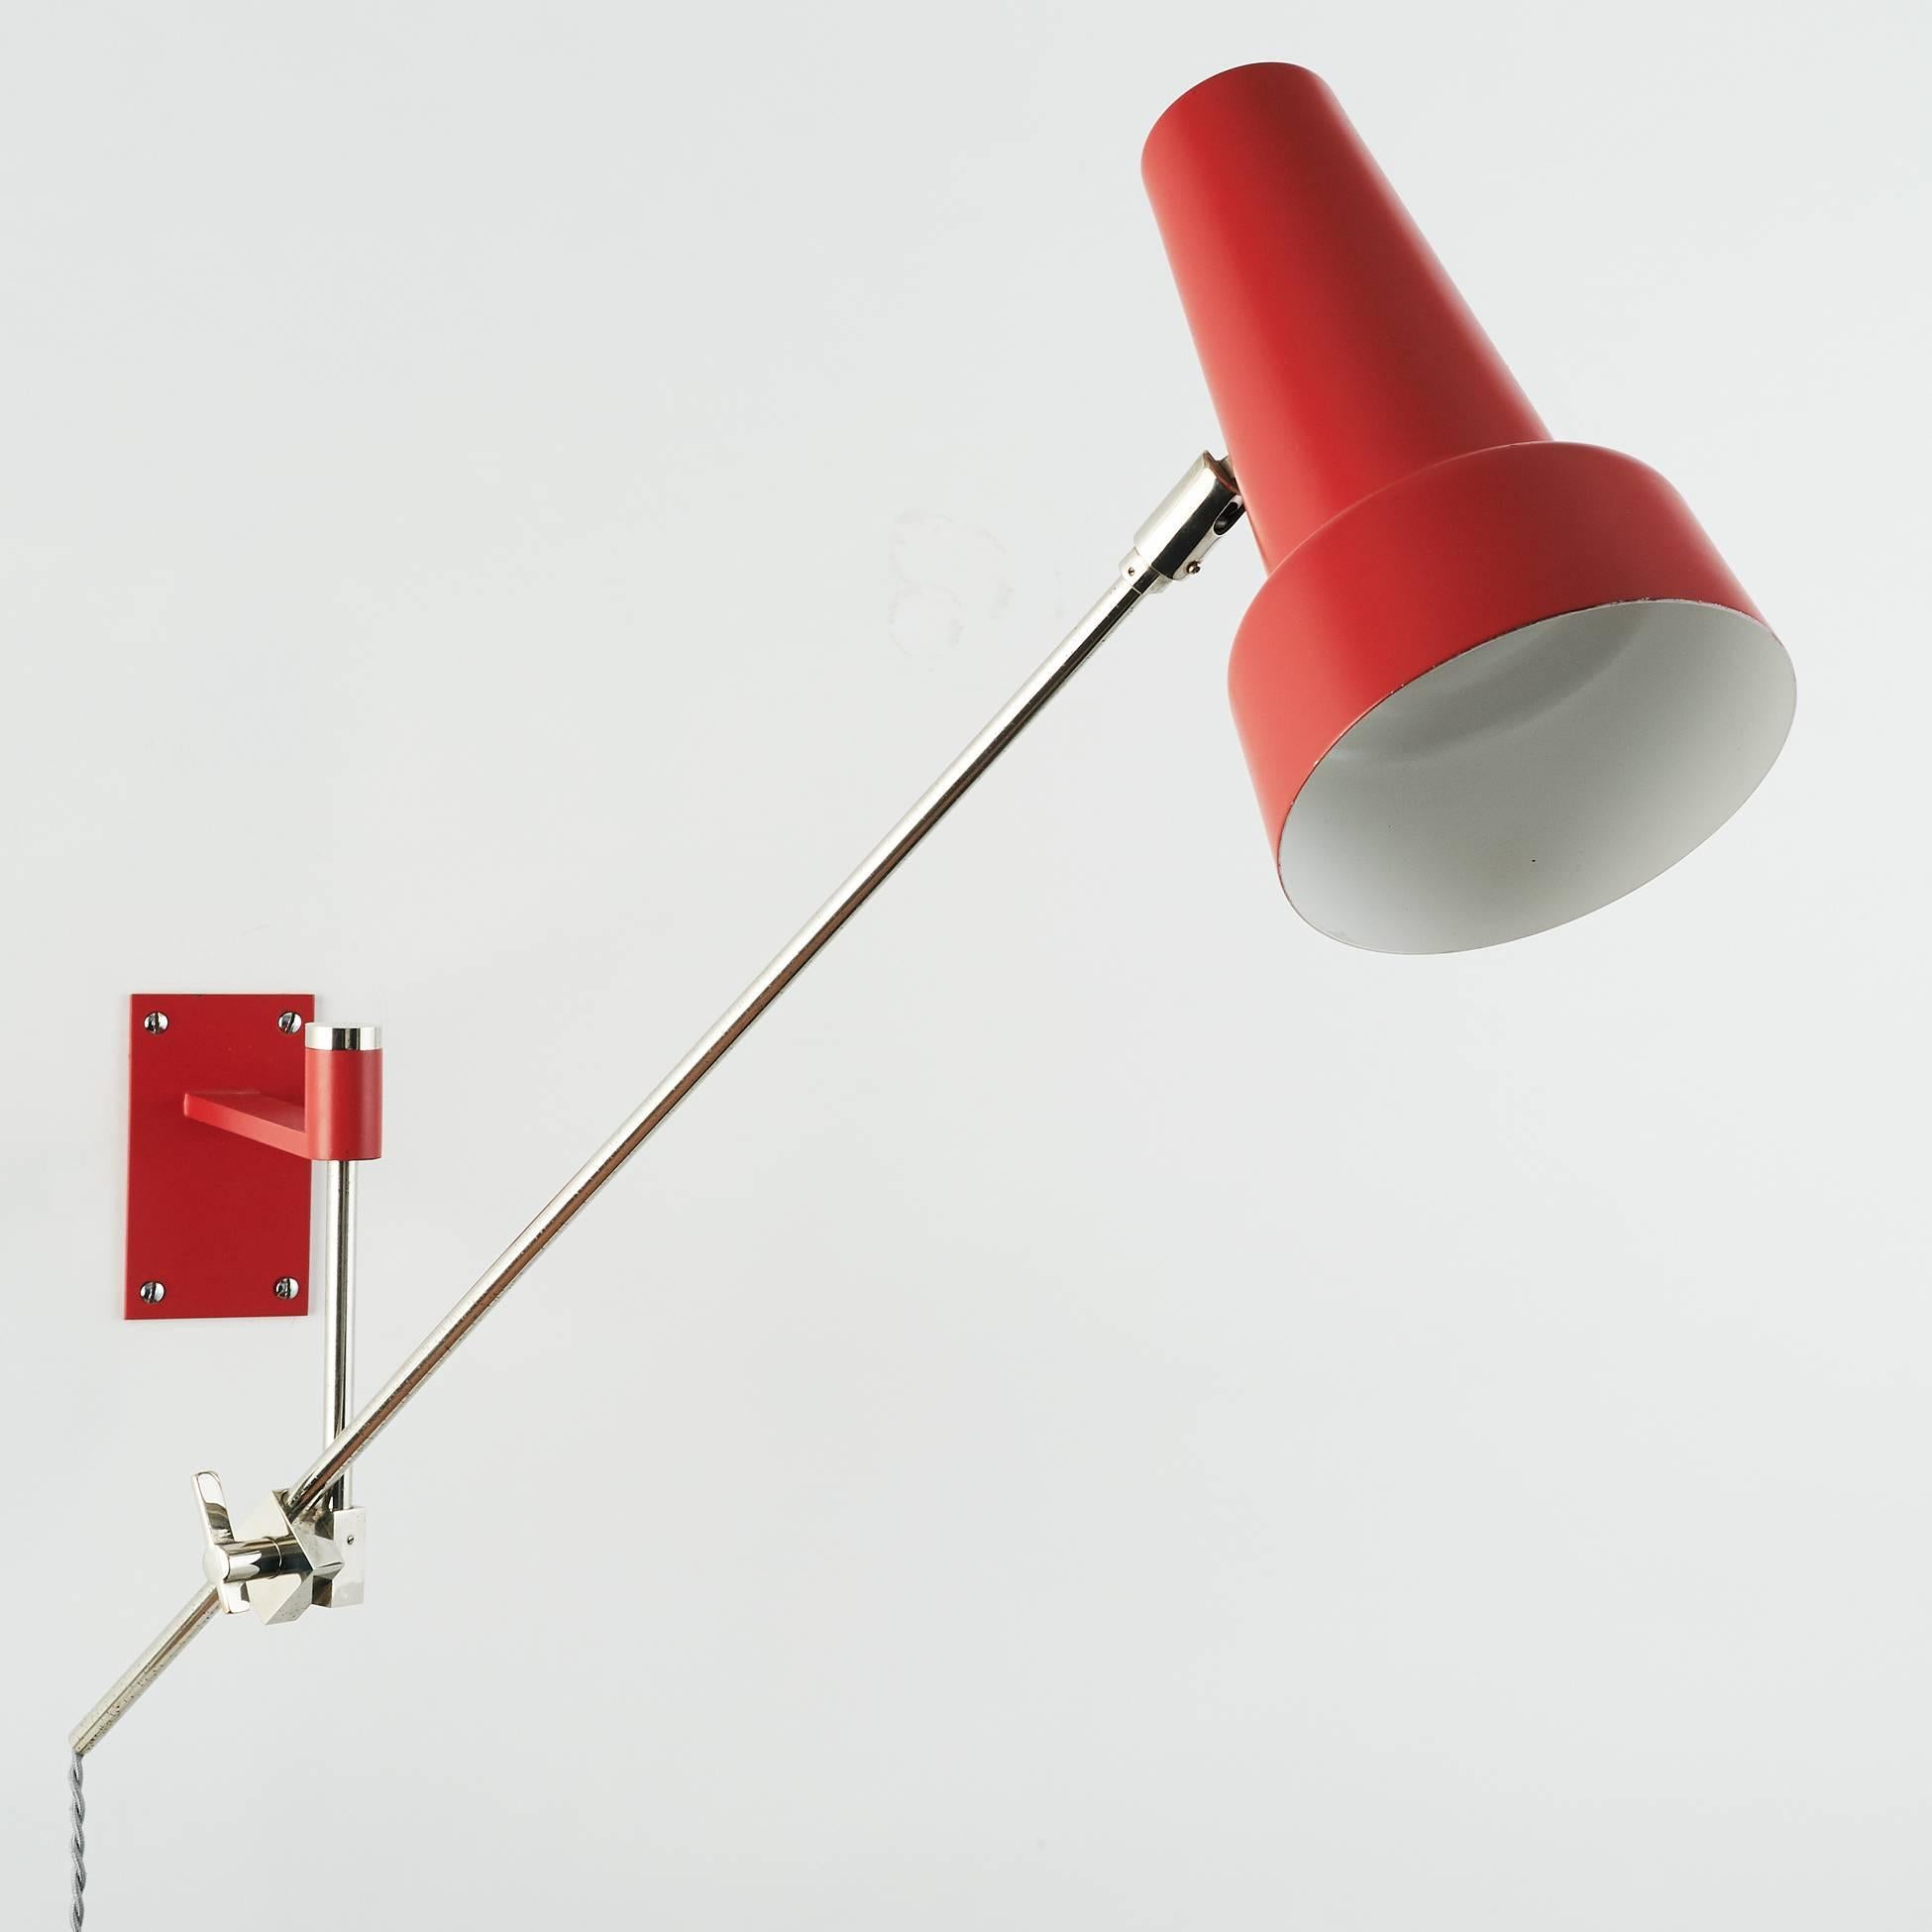 Metal Dynamic Red Enameled Swing Arm Sconce with Silver Chromed Mounts, Italy 1970’s For Sale